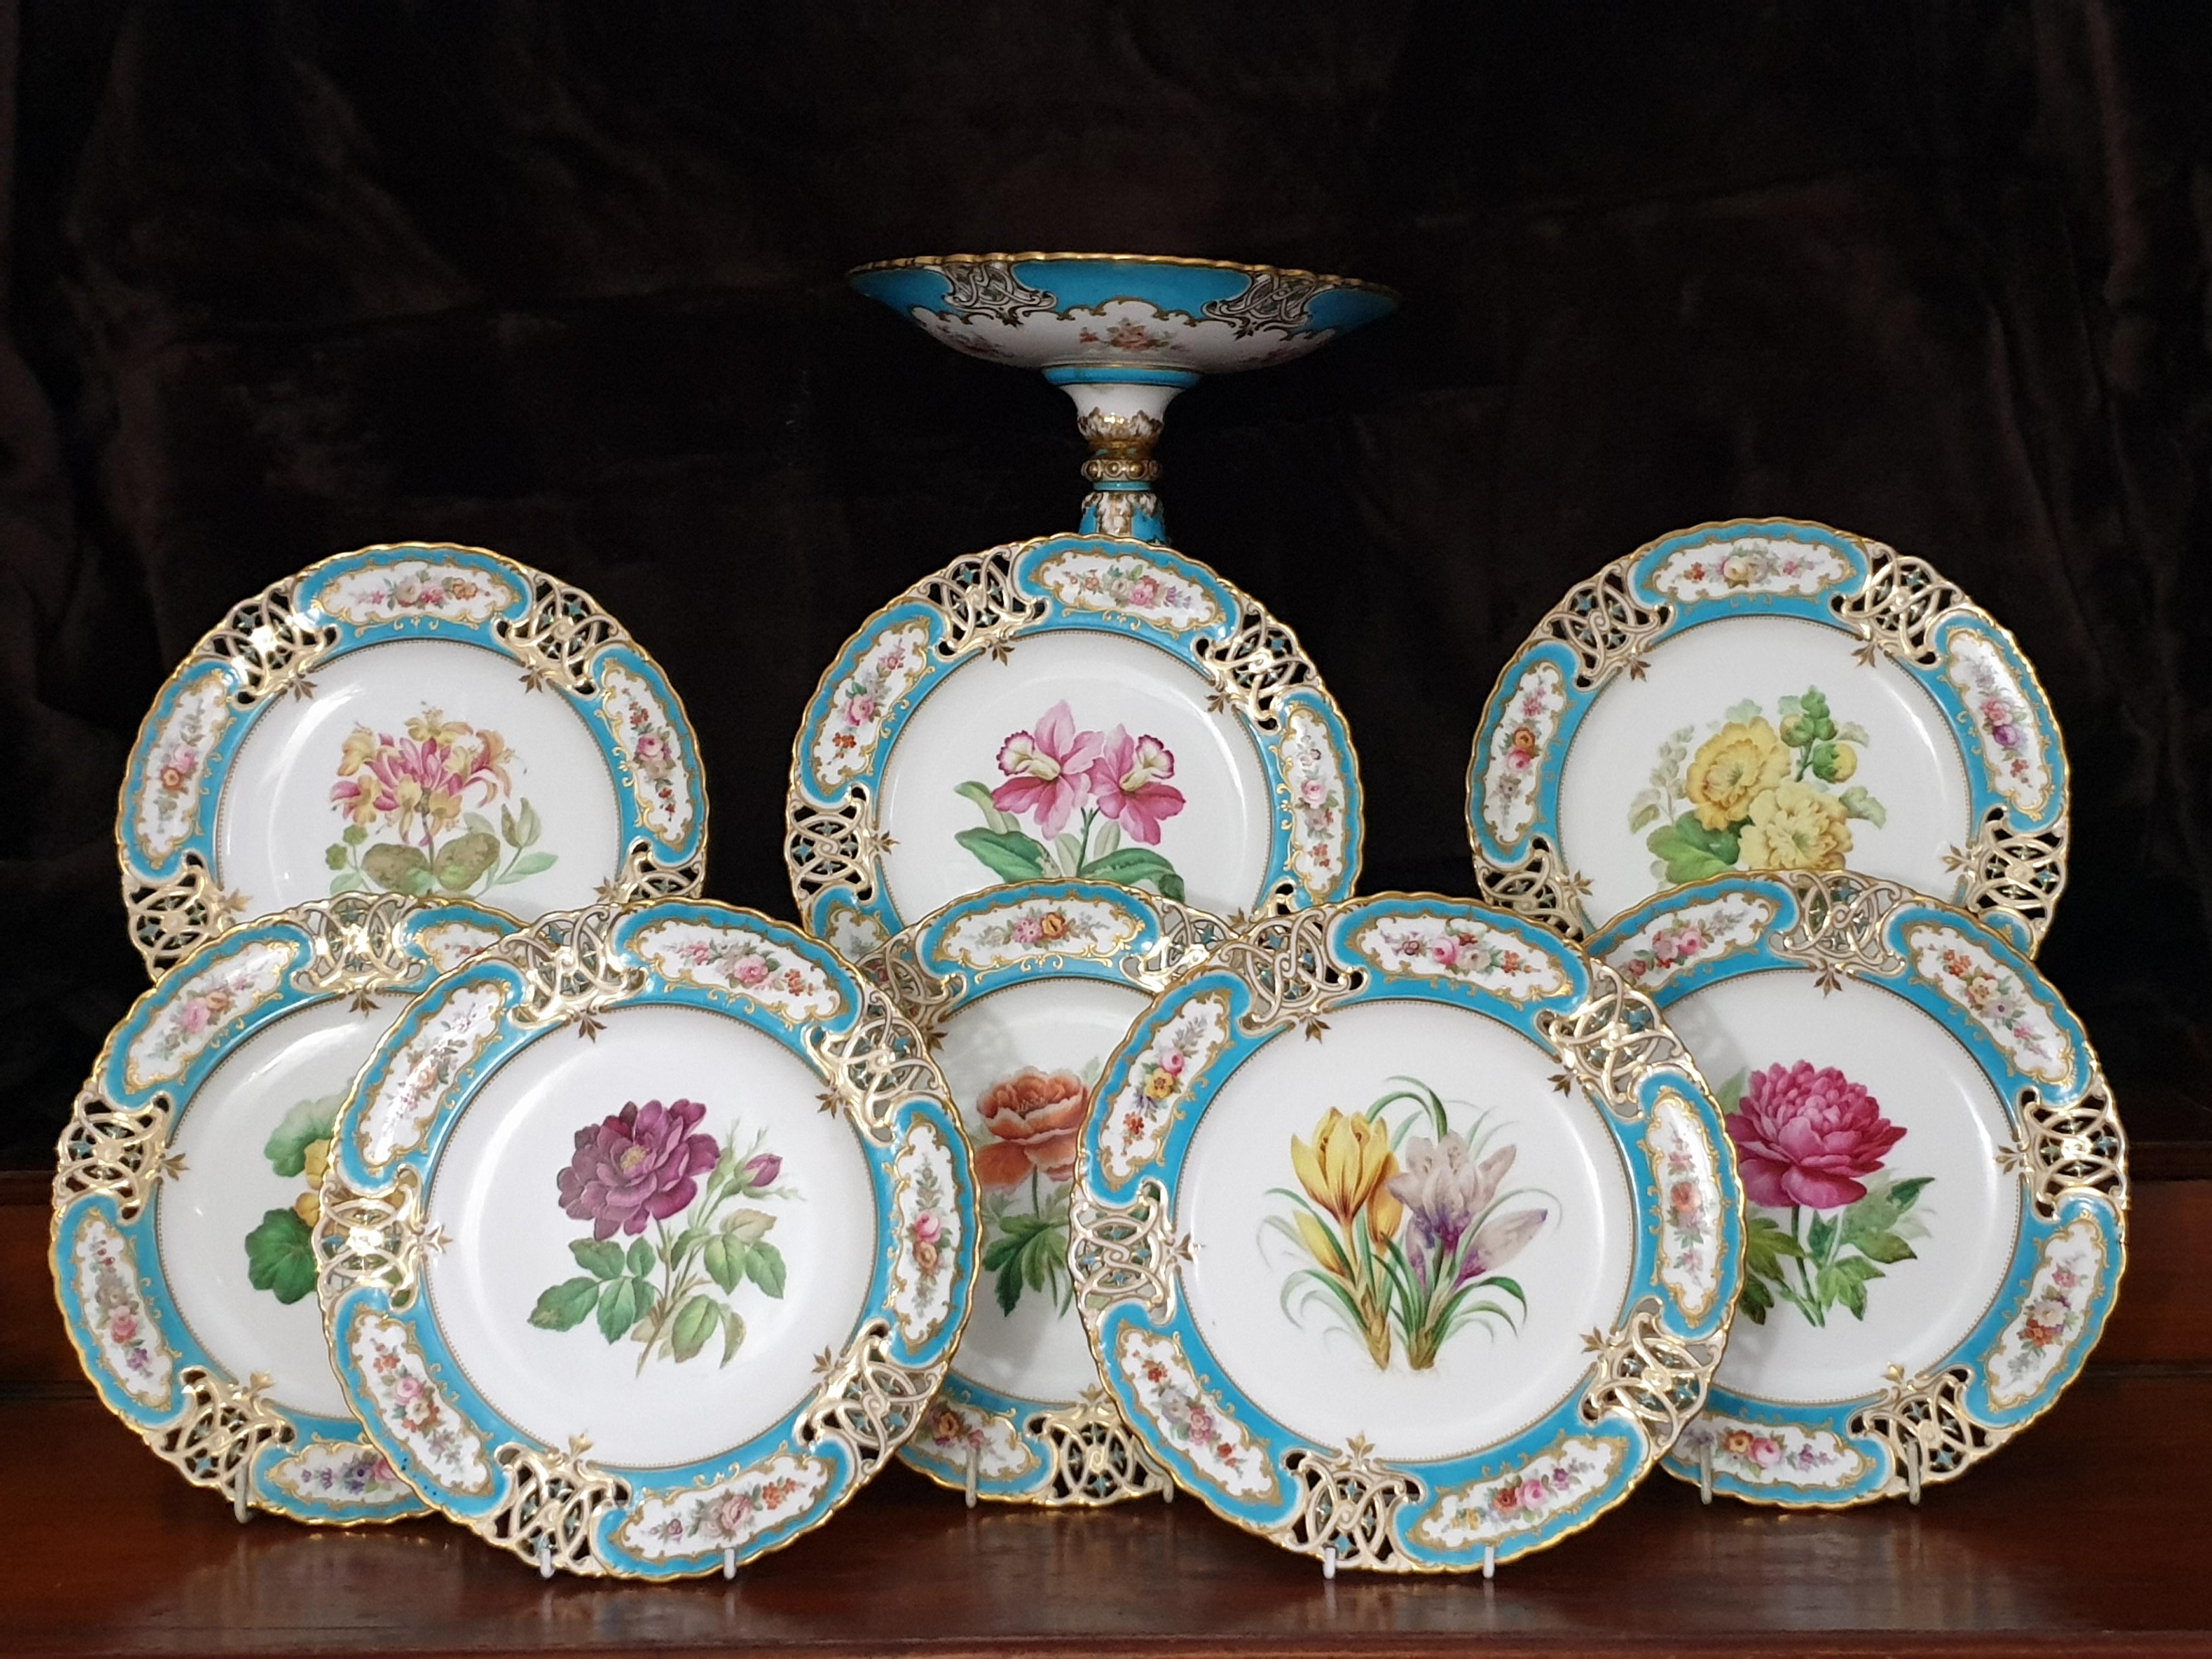 Minton reticulated exceptional botanical turquoise dessert service for 8 with comport. Reticulated in the shape of royal arms each plate individually hand painted with a different floral specimen to the center with reticulated turquoise enameled